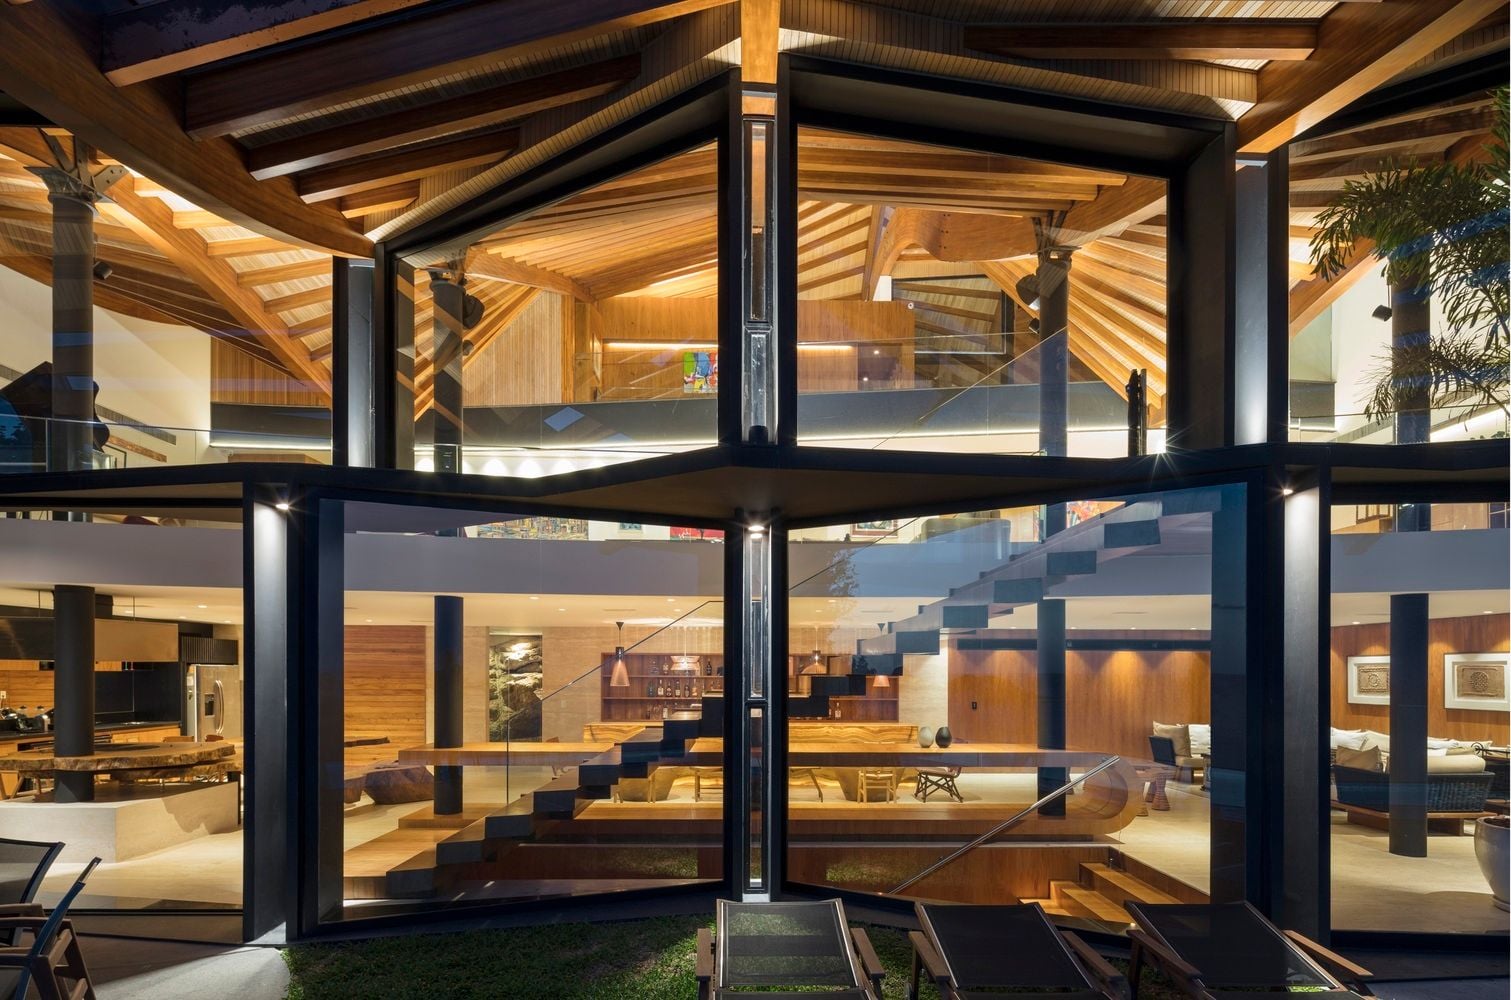 A look inside the sculptural Wave House through it's many large operable glass panels